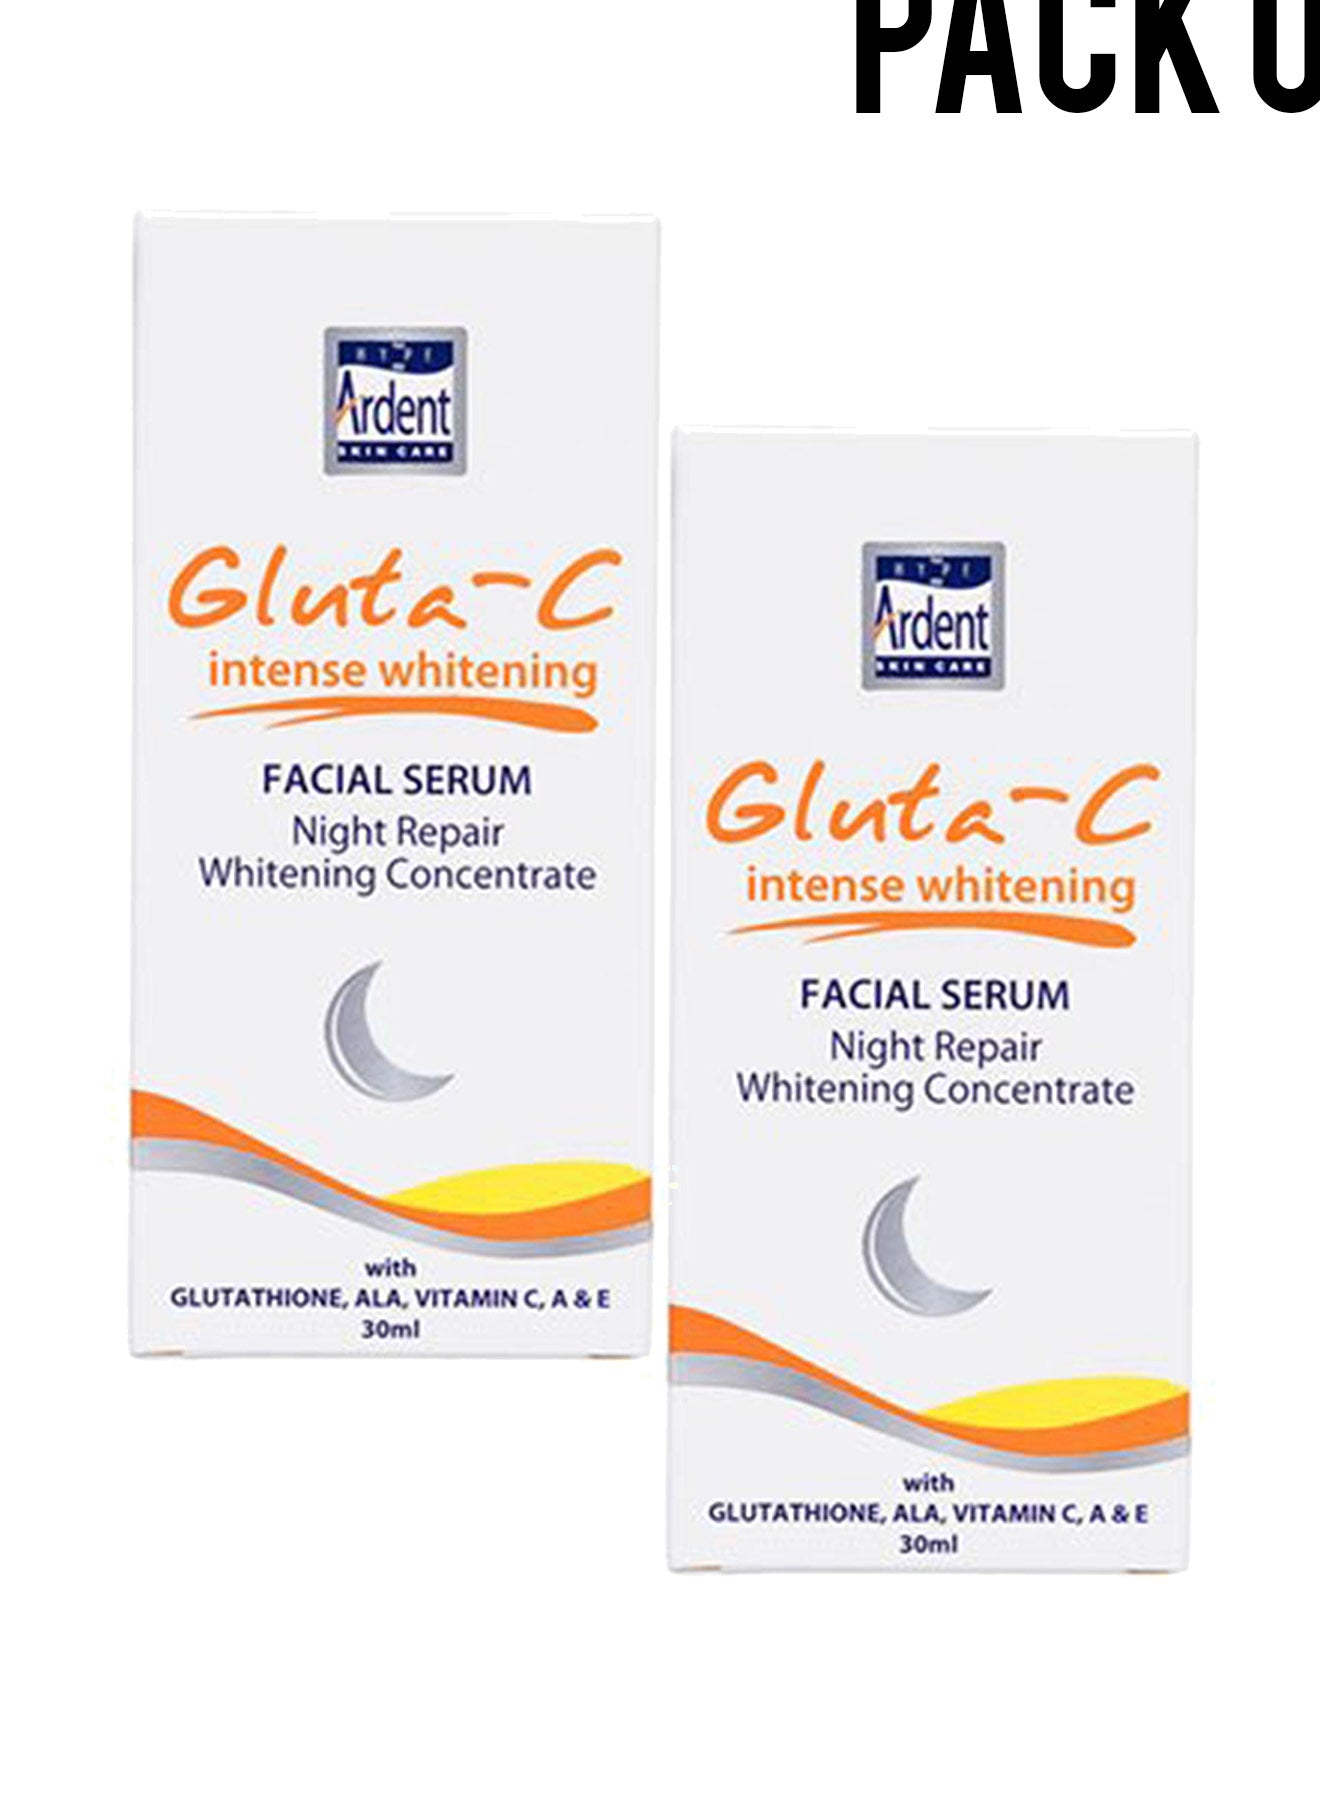 GlutaC intense whitening Facial Serum Night Repair Whitening Concentrate 30ml Value Pack of 2 